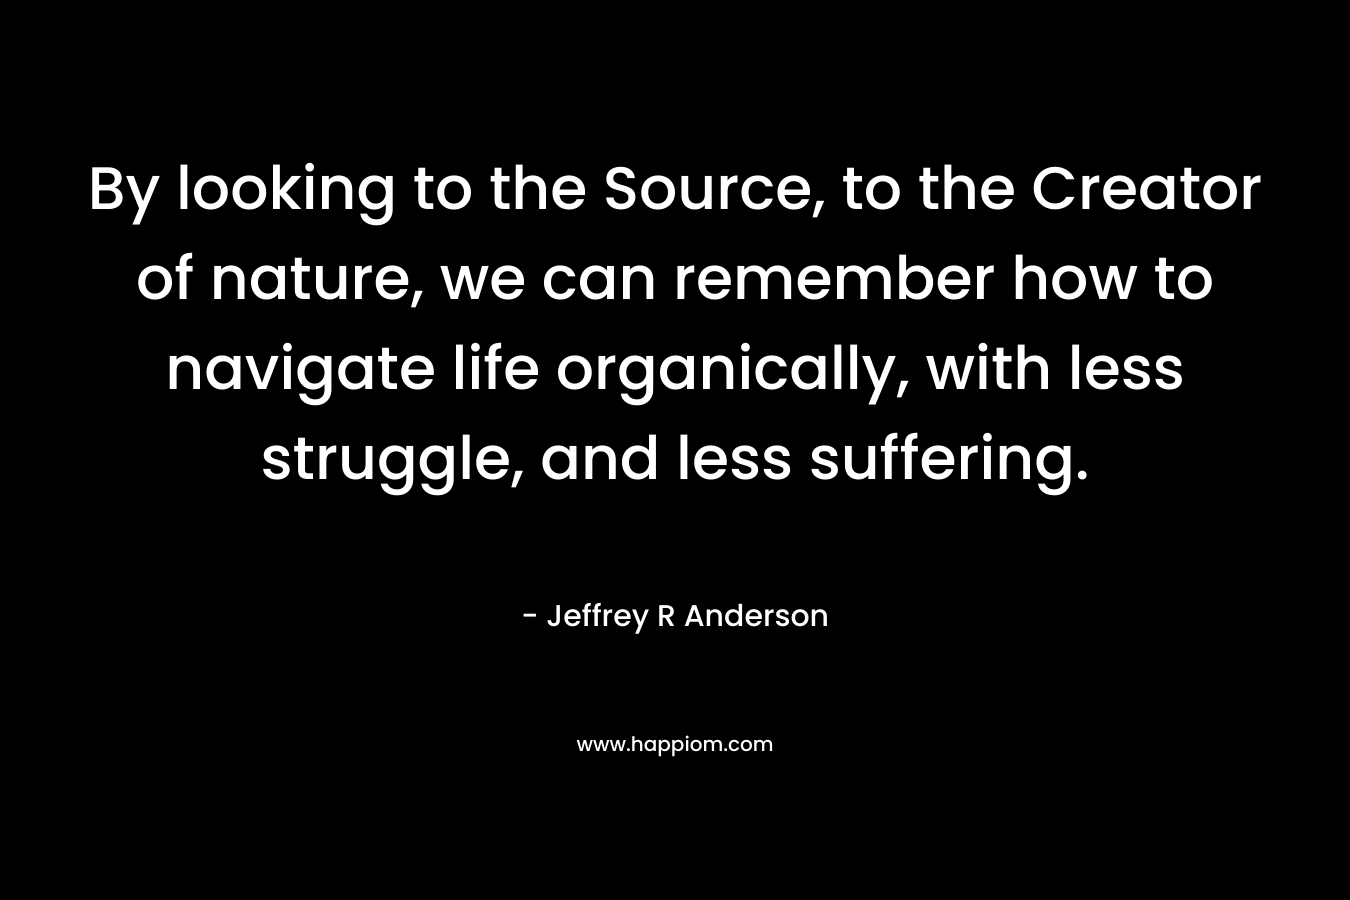 By looking to the Source, to the Creator of nature, we can remember how to navigate life organically, with less struggle, and less suffering. – Jeffrey R Anderson